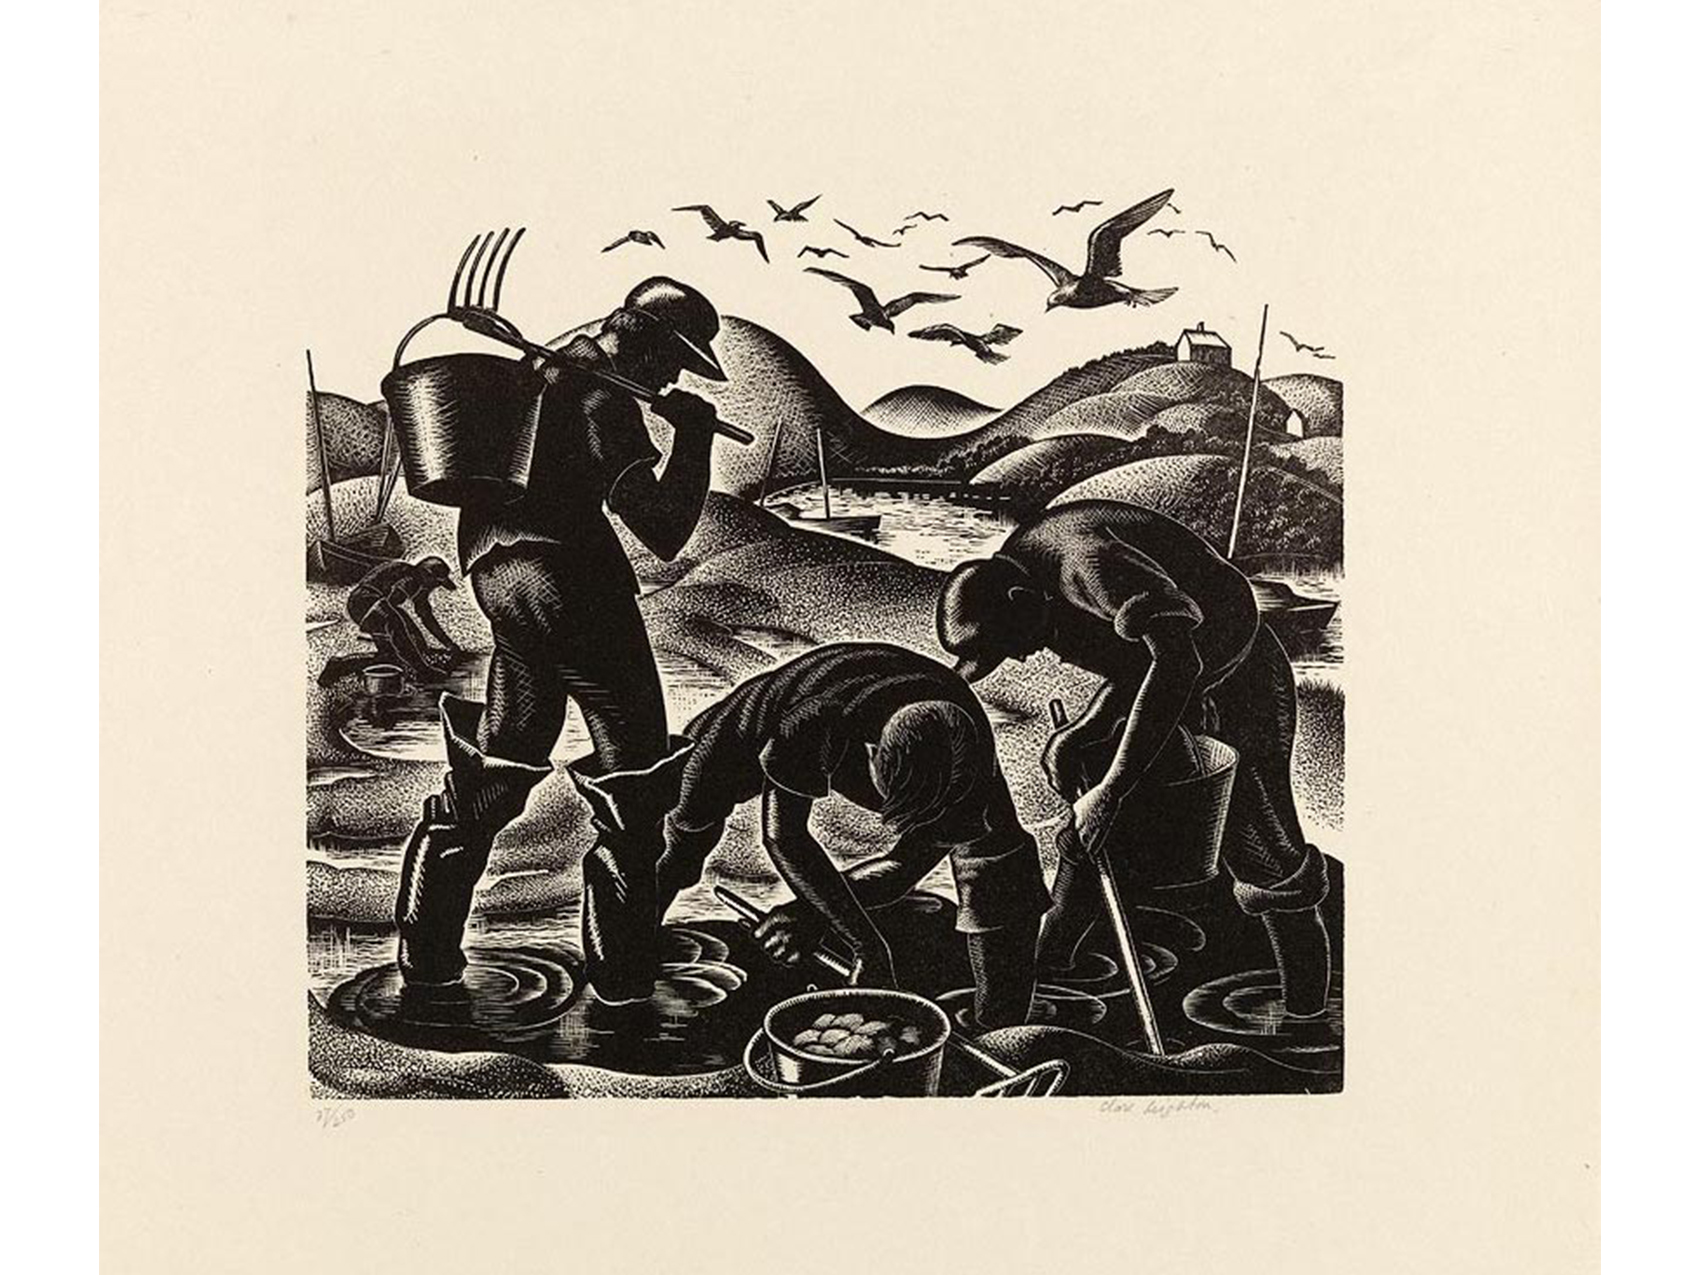 three men in tall boots standing shallow water with low hills and flying seagulls in background, left figure has a bucket attached to a rake over his shoulder, center figure is bend over pulling his rake with bucket of clams near him, third figure is bent pulling his rake with his bucket between his legs